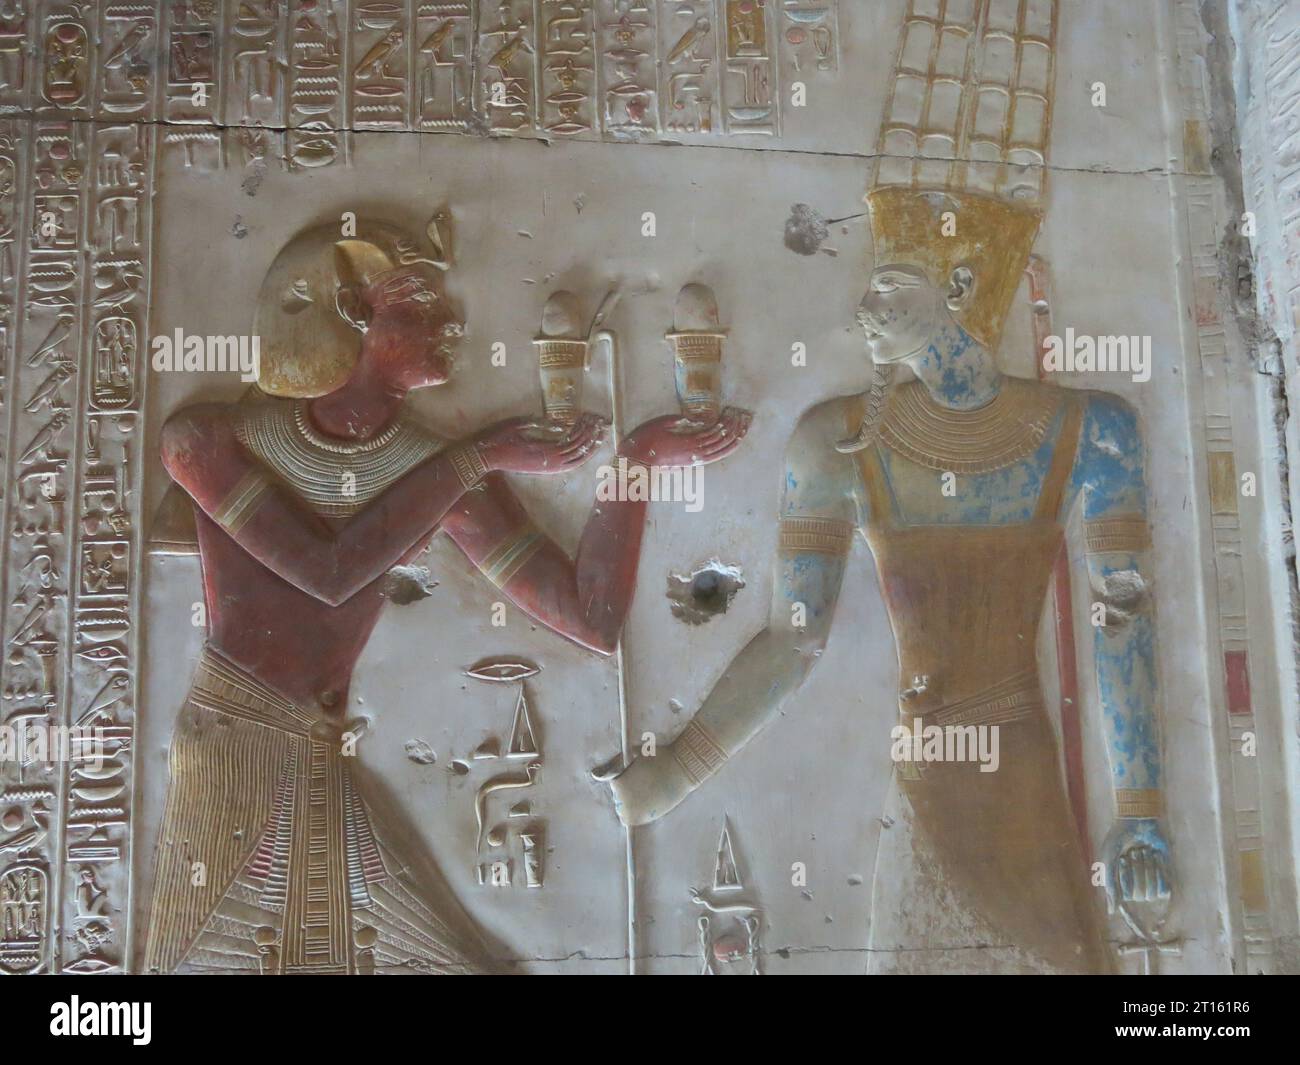 Colourful, carved reliefs in the Chapel of Osiris at the Great Temple of Seti I in Abydos, one of the oldest cities of Ancient Egypt. Stock Photo